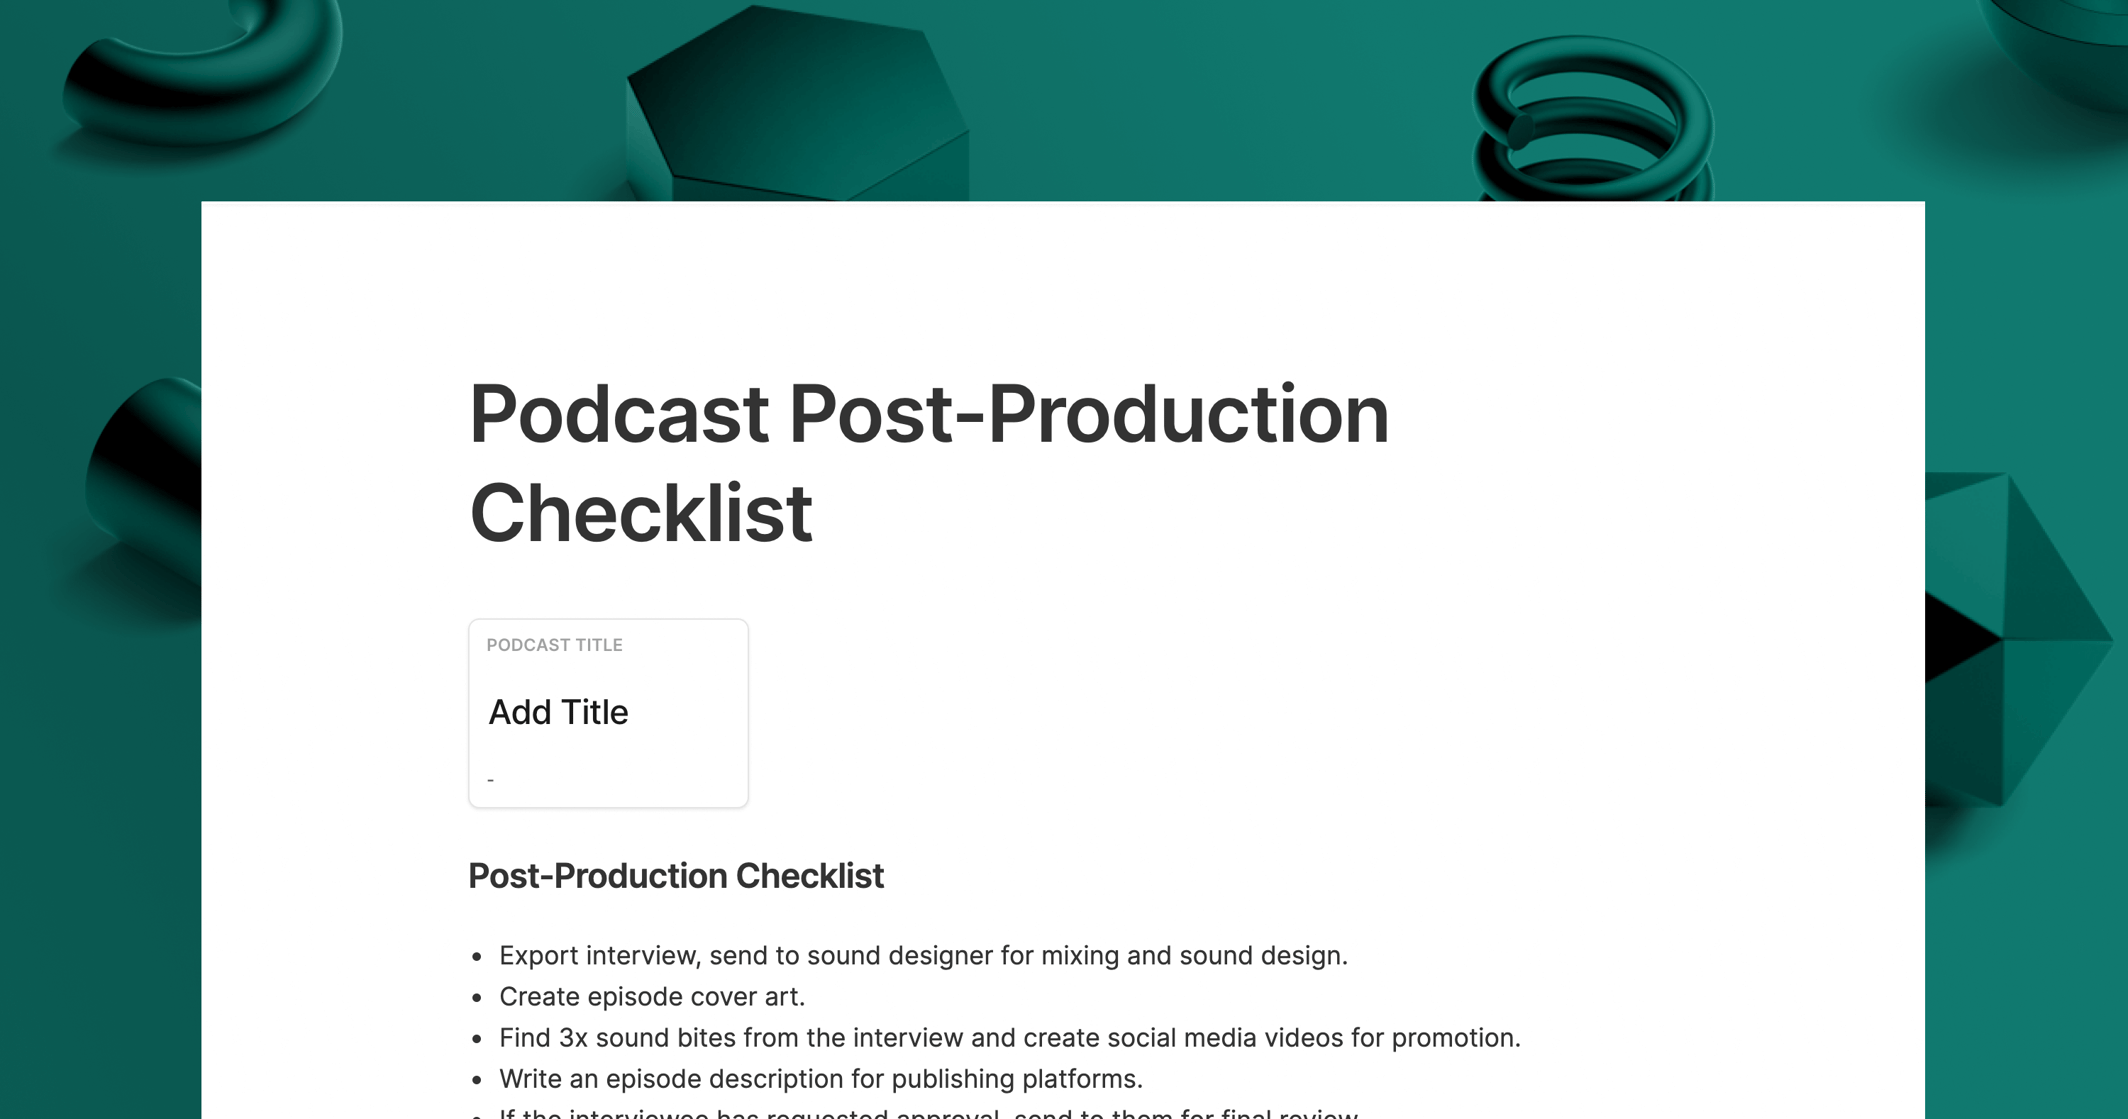 https://3389140.fs1.hubspotusercontent-na1.net/hubfs/3389140/podcast%20post%20production%20checklist%20cover.png